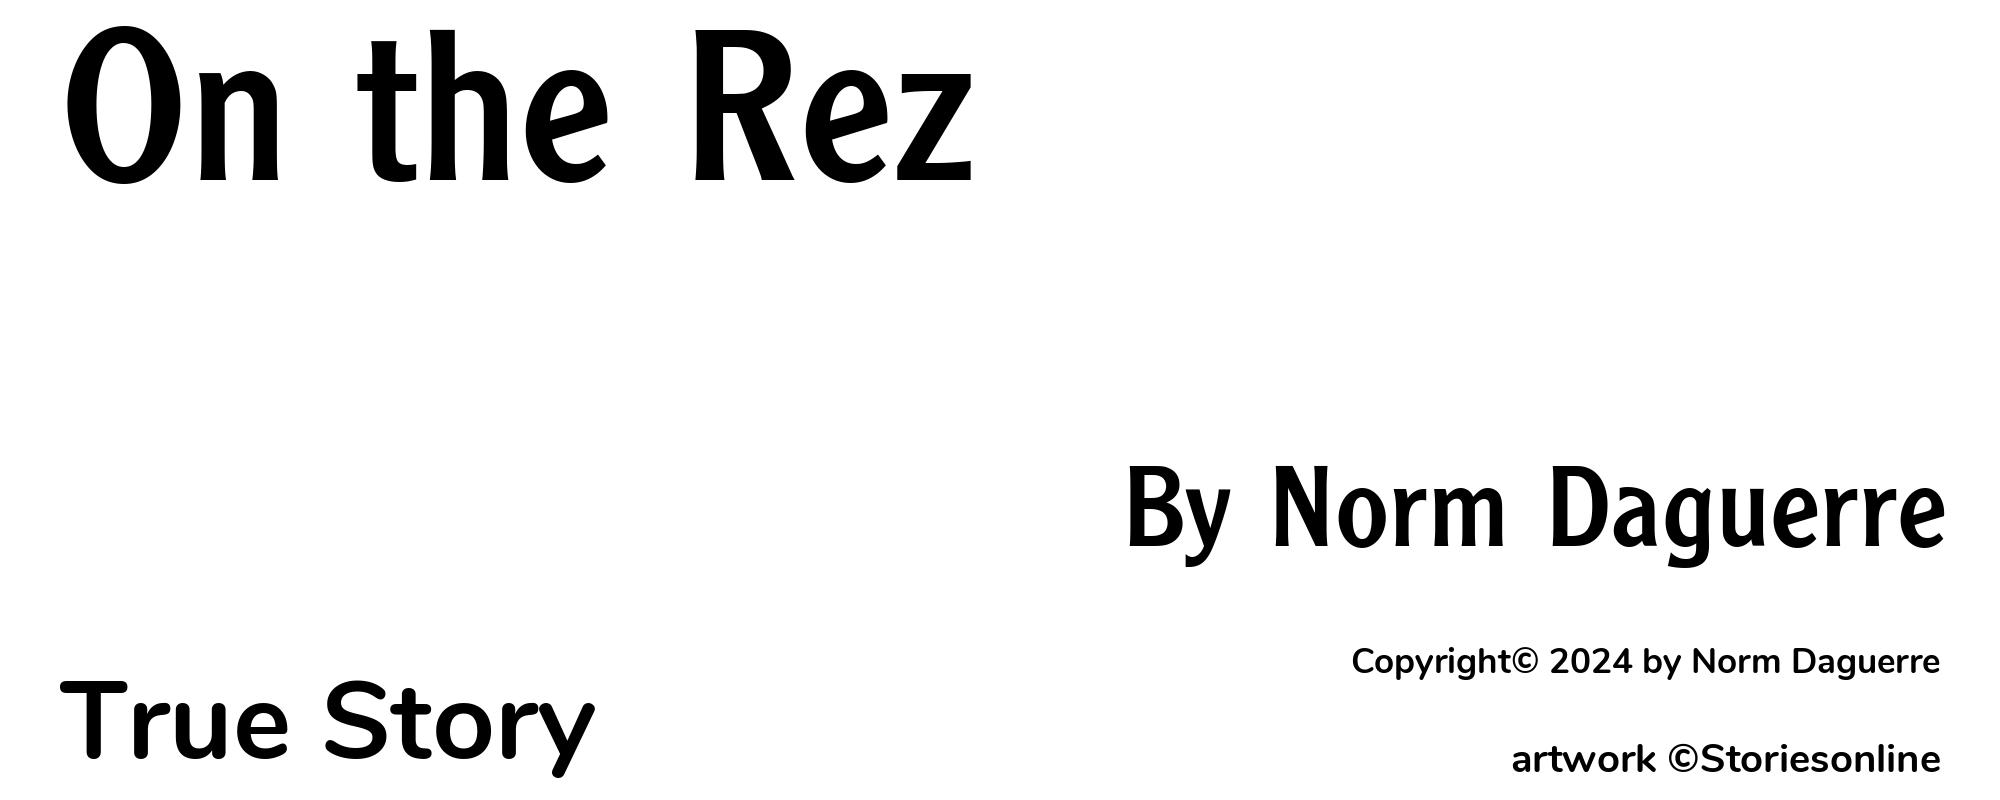 On the Rez - Cover